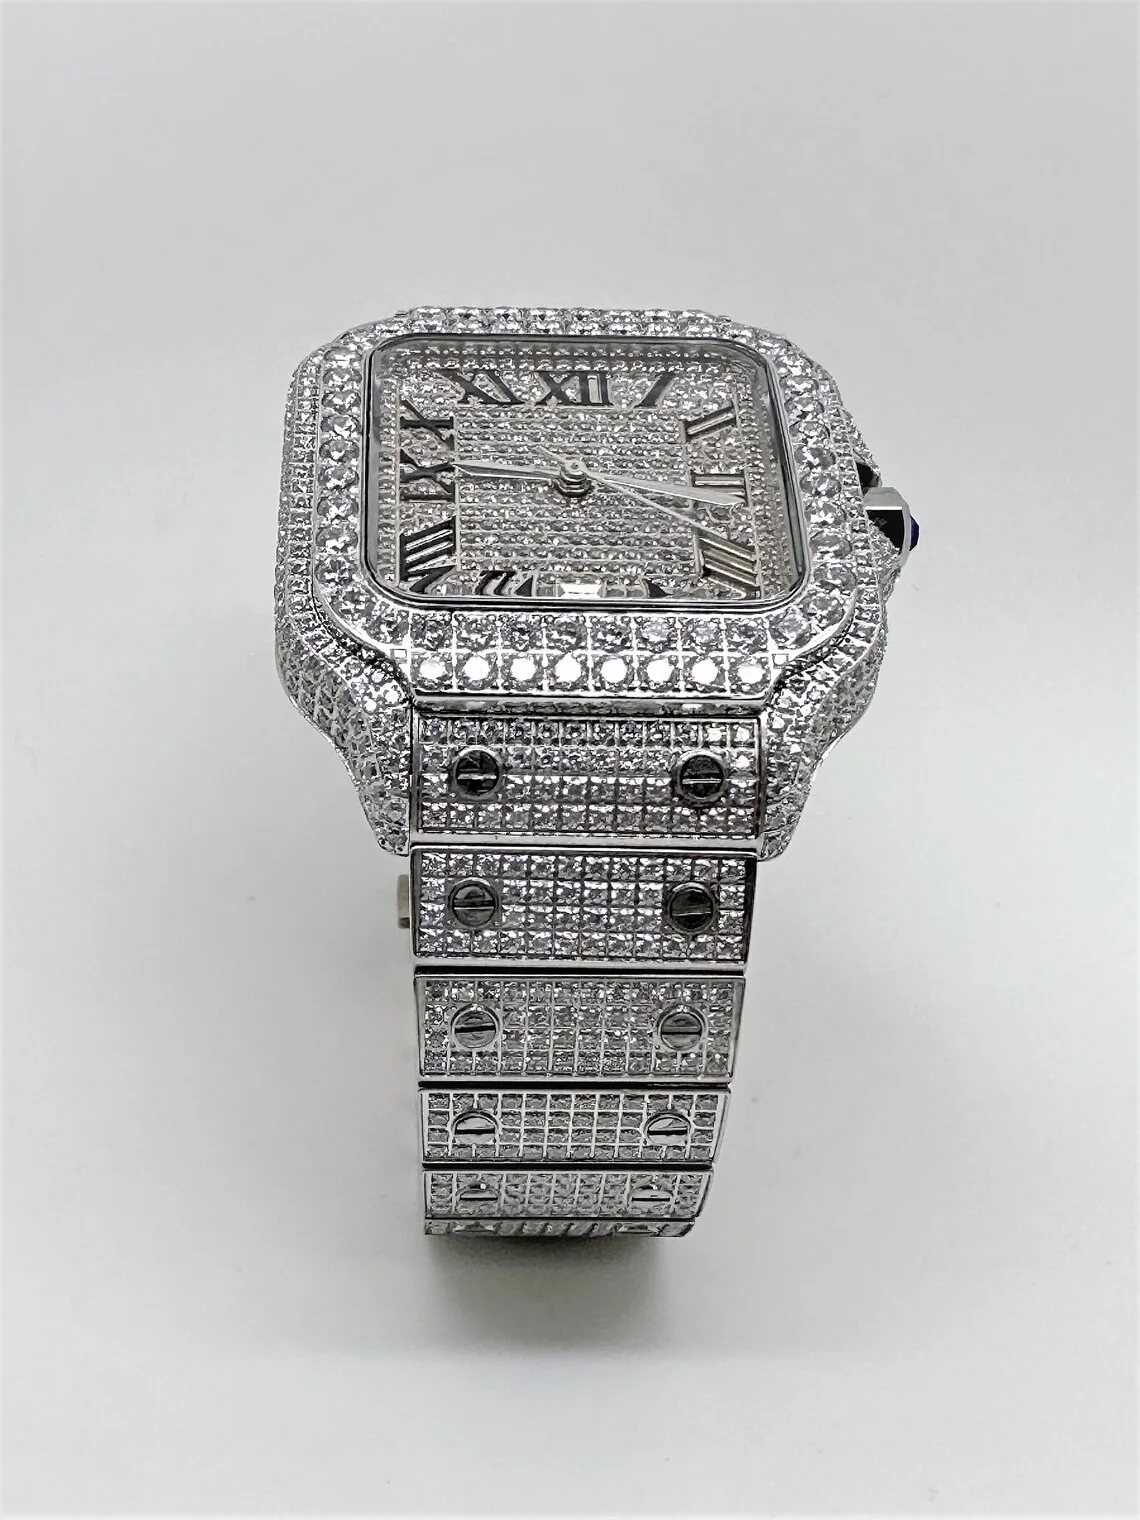 Cartier watch for men | Certified moissanites studded watch | Fully iced out